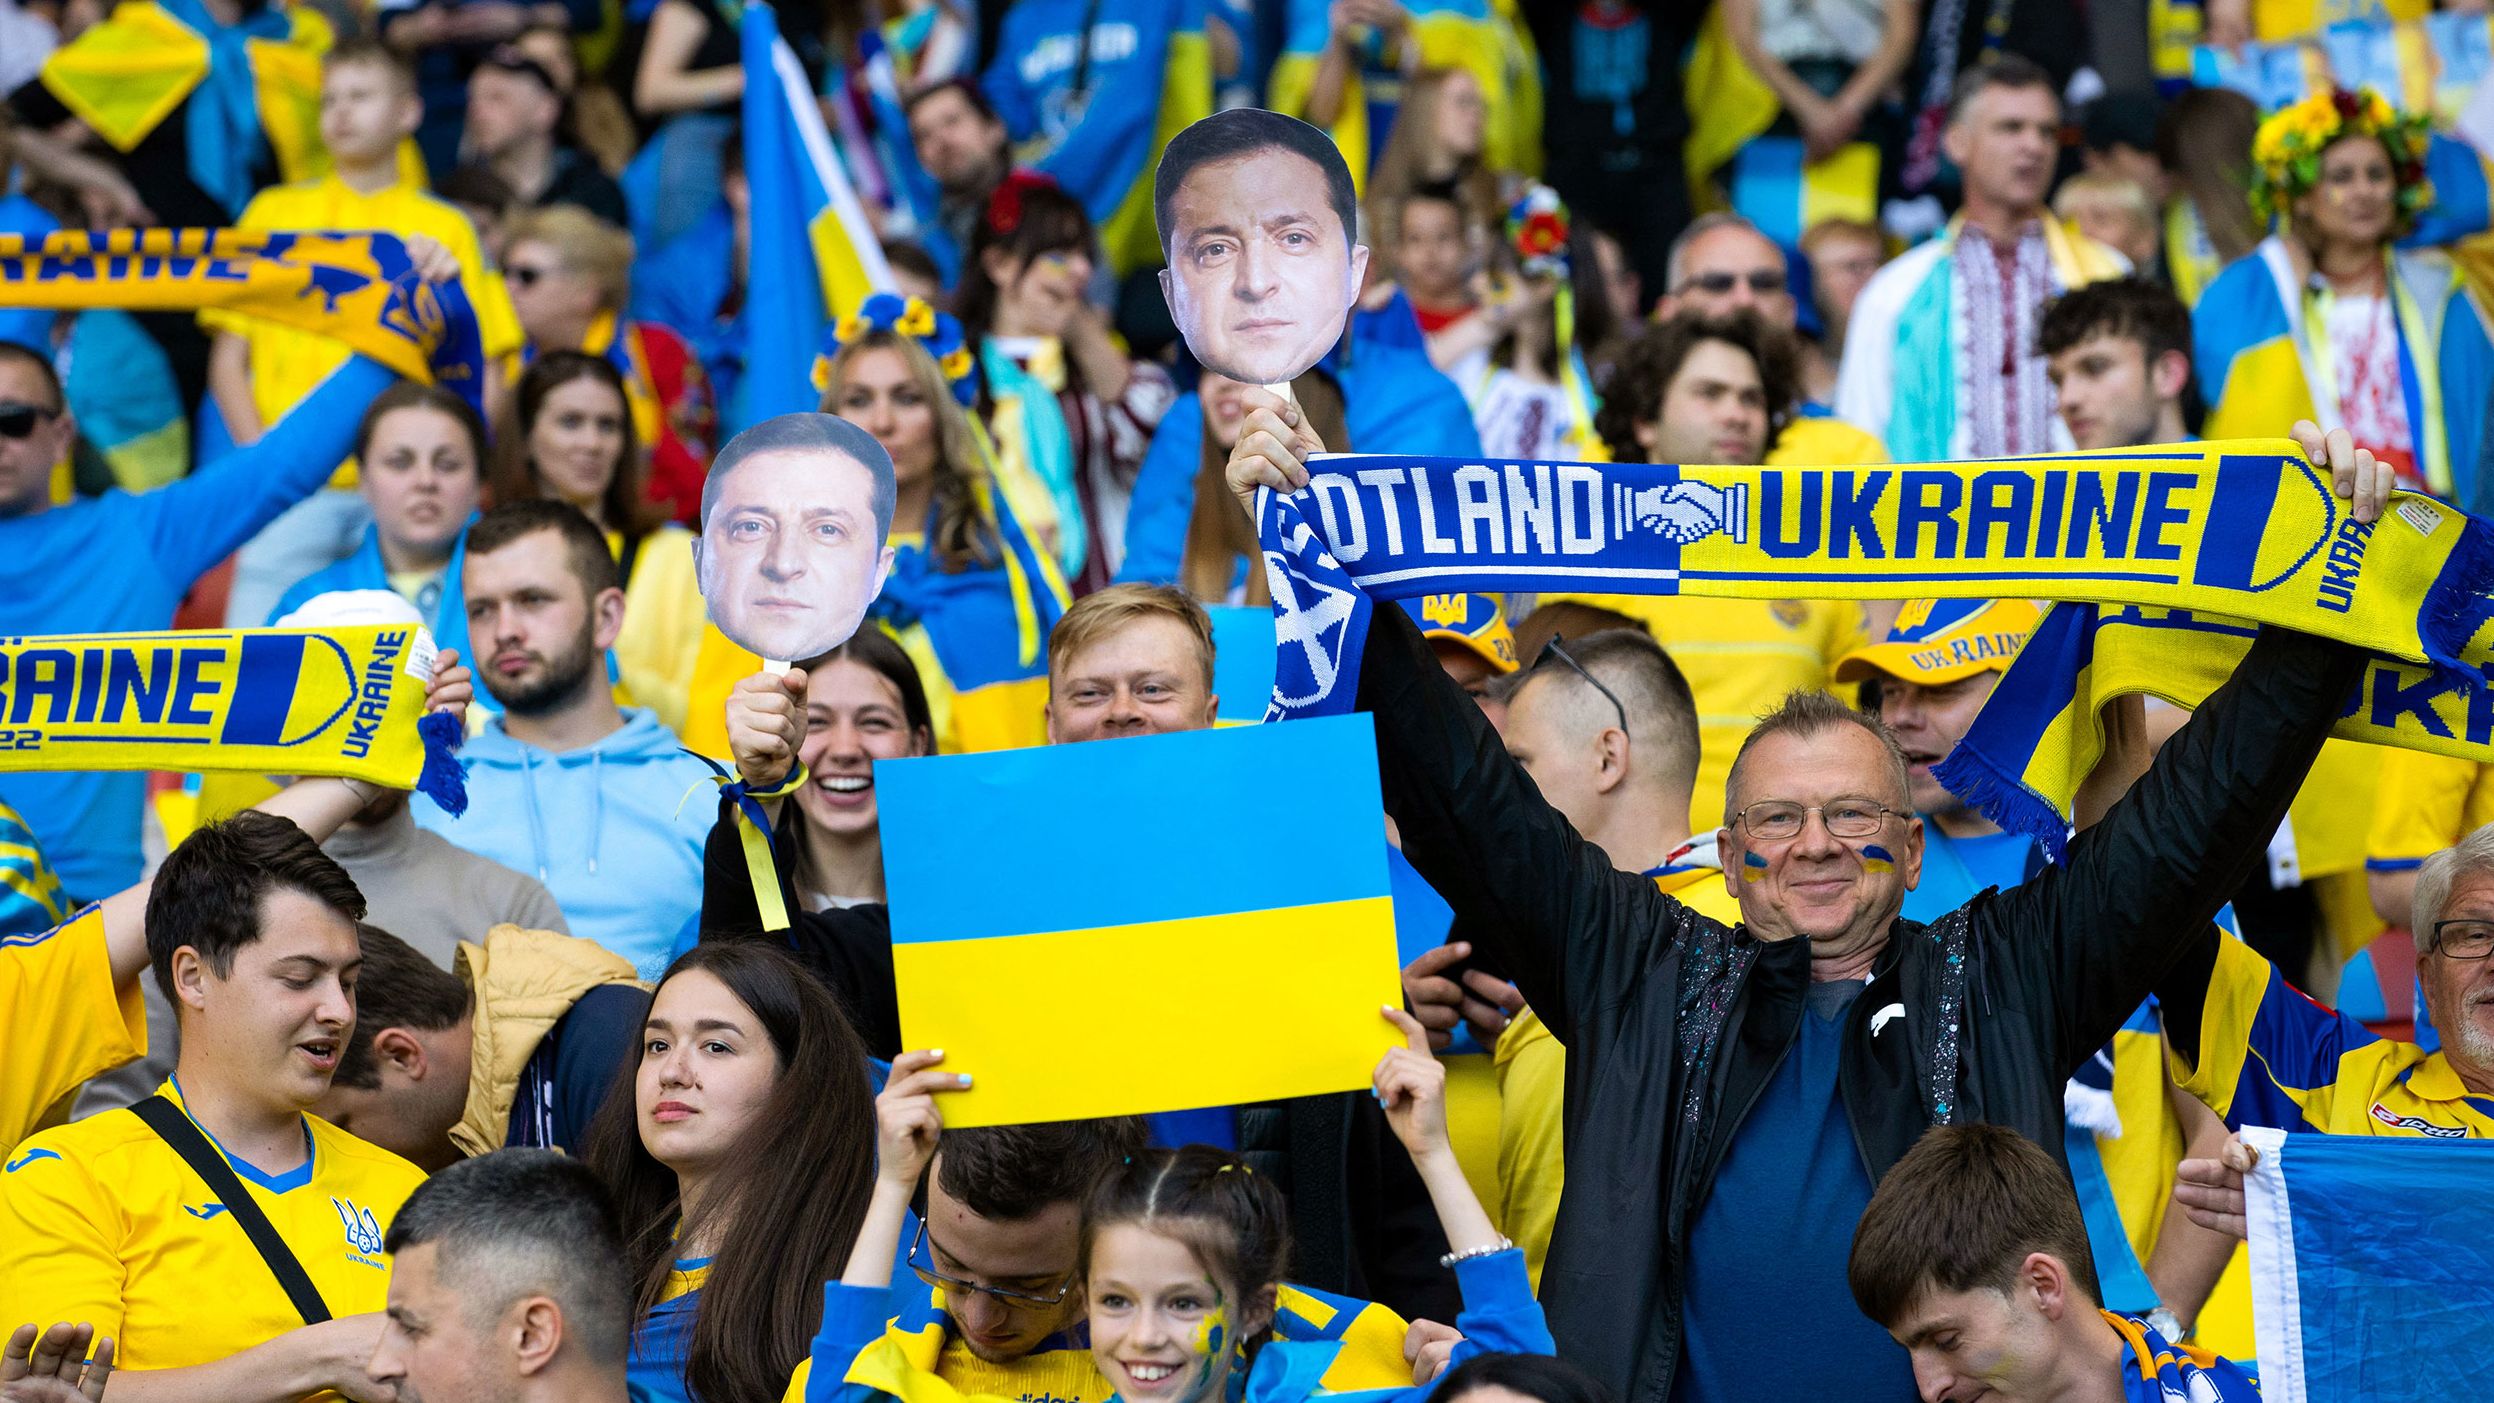 Ukraine Fans with masks of President Volodymyr Zelensky during the World Cup playoff semifinal.